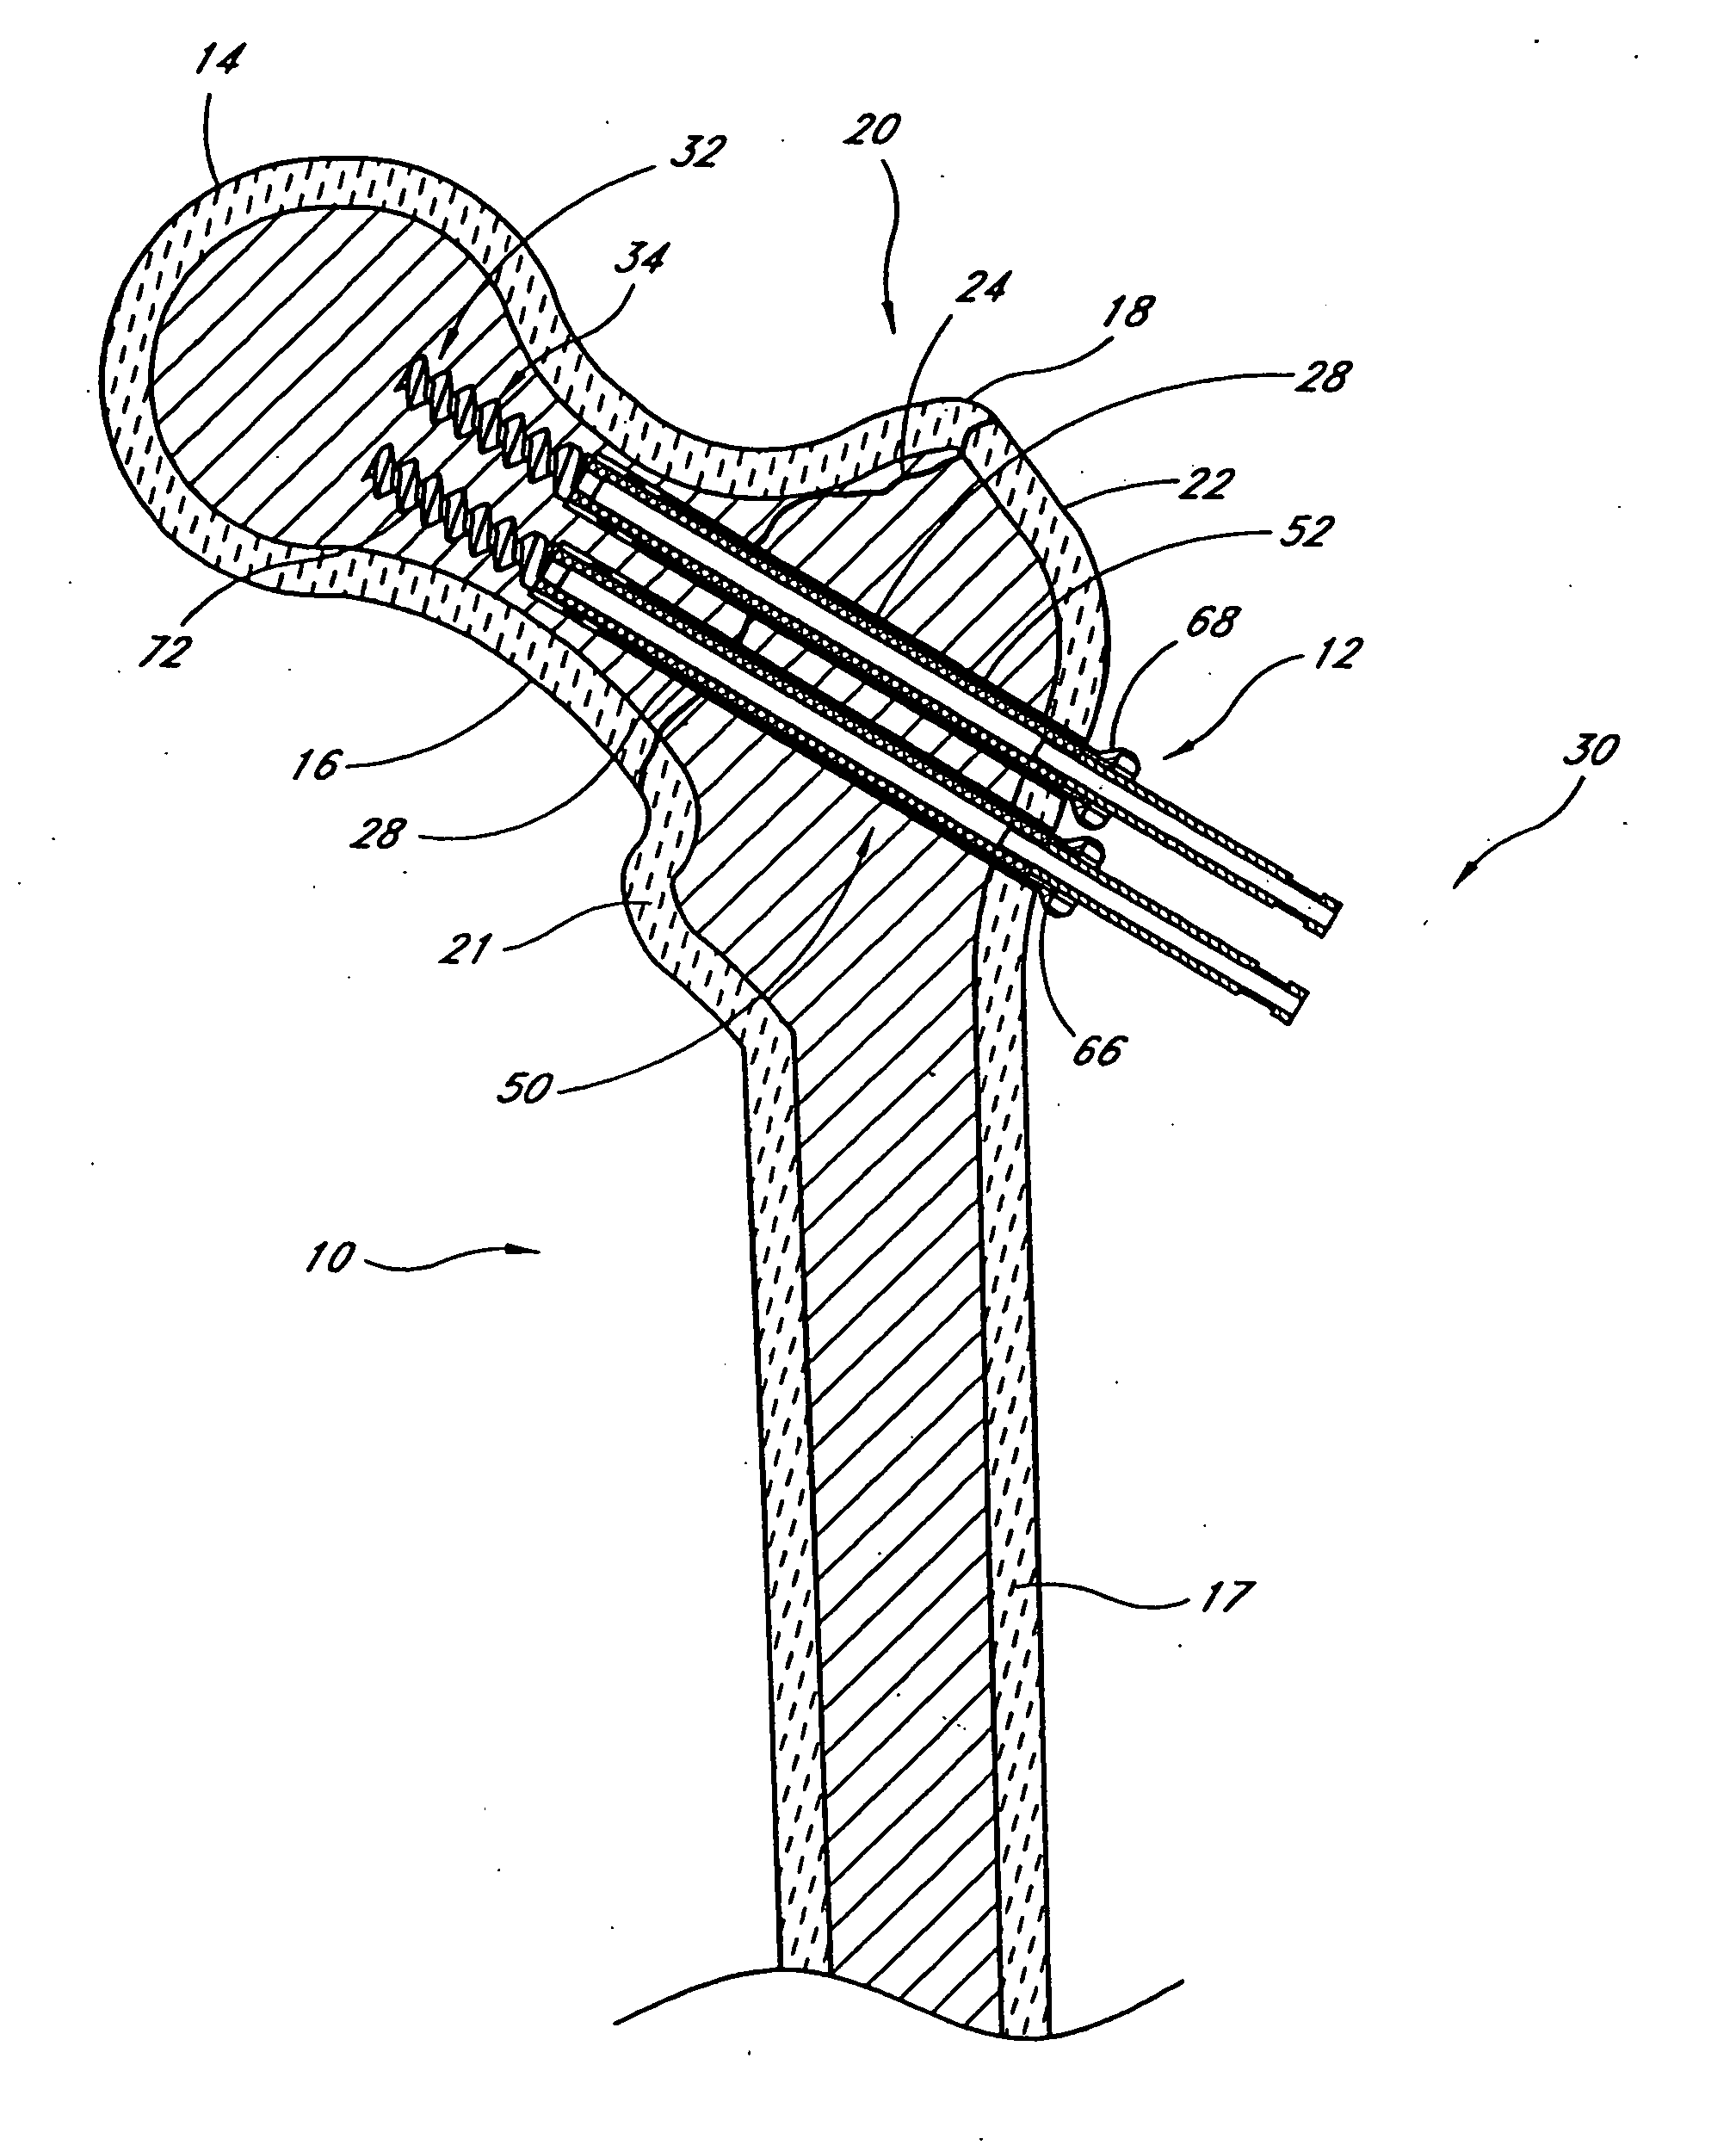 Method and apparatus for bone fixation with secondary compression